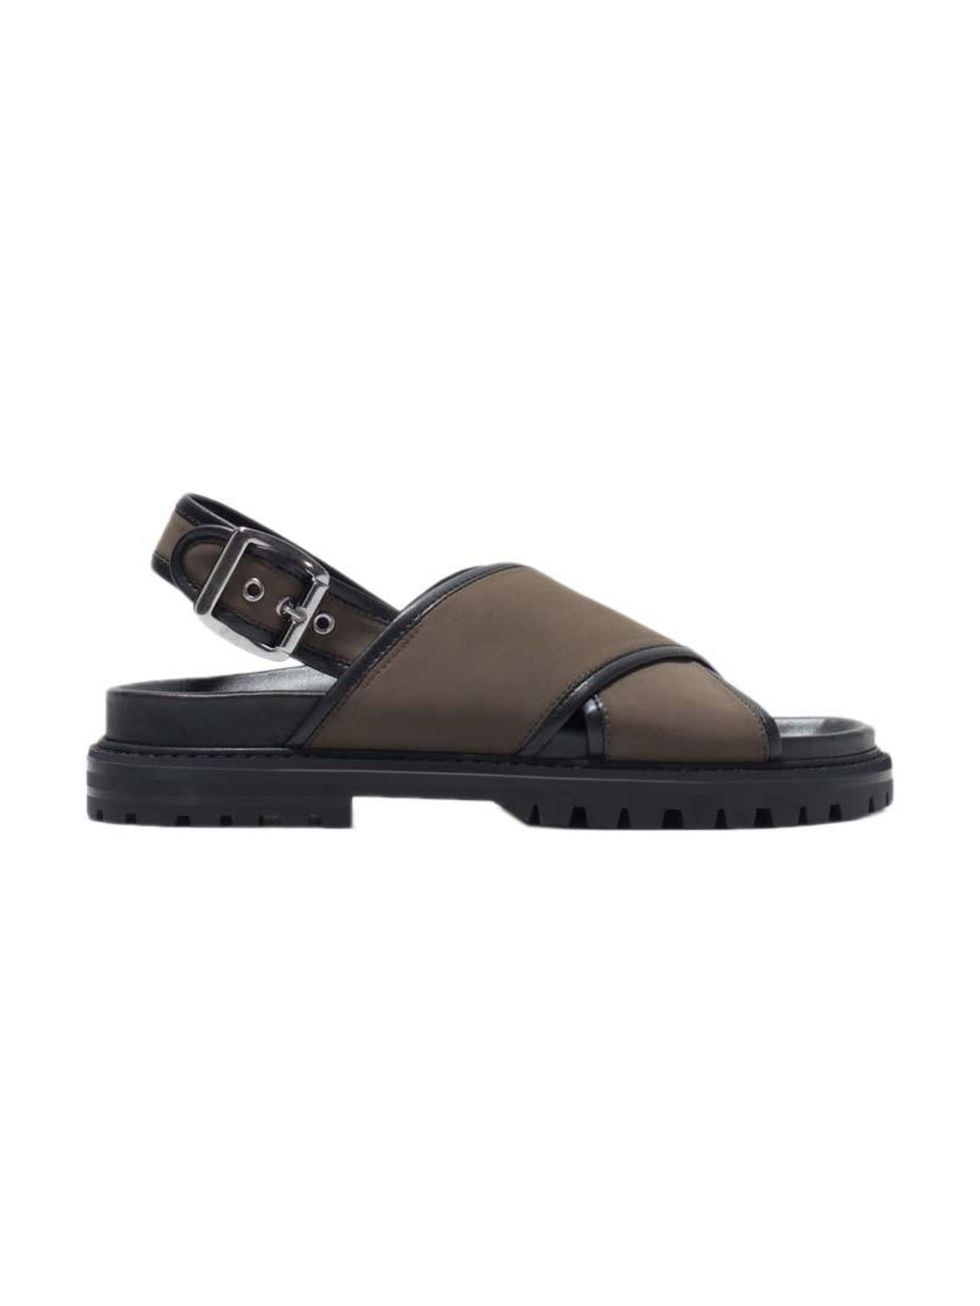 <p>These chunky sandals made Accessories Editor Donna Wallace's cut.</p>

<p><a href="http://www.zara.com/uk/en/new-this-week/woman/cross-strap-fabric-footbed-sandals-c363008p2636042.html" target="_blank">Zara</a> sandals, £49.99</p>